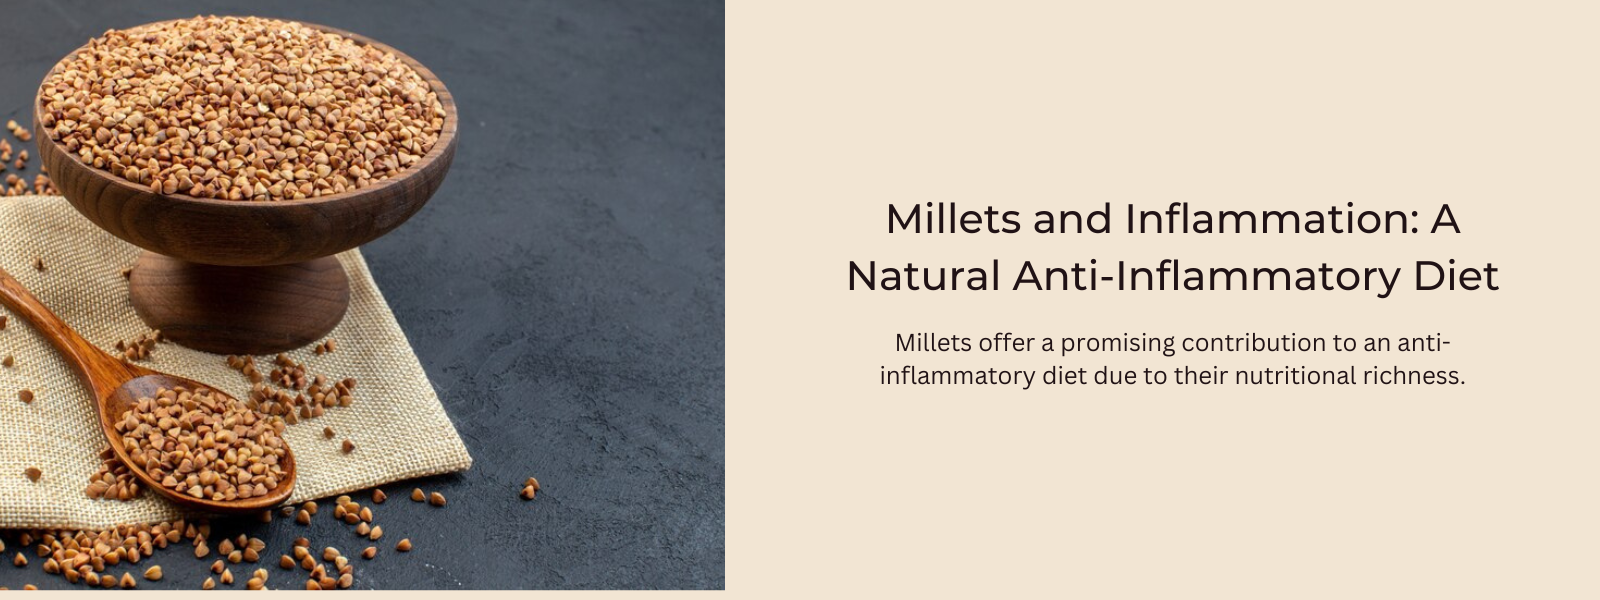 Millets and Inflammation: A Natural Anti-Inflammatory Diet